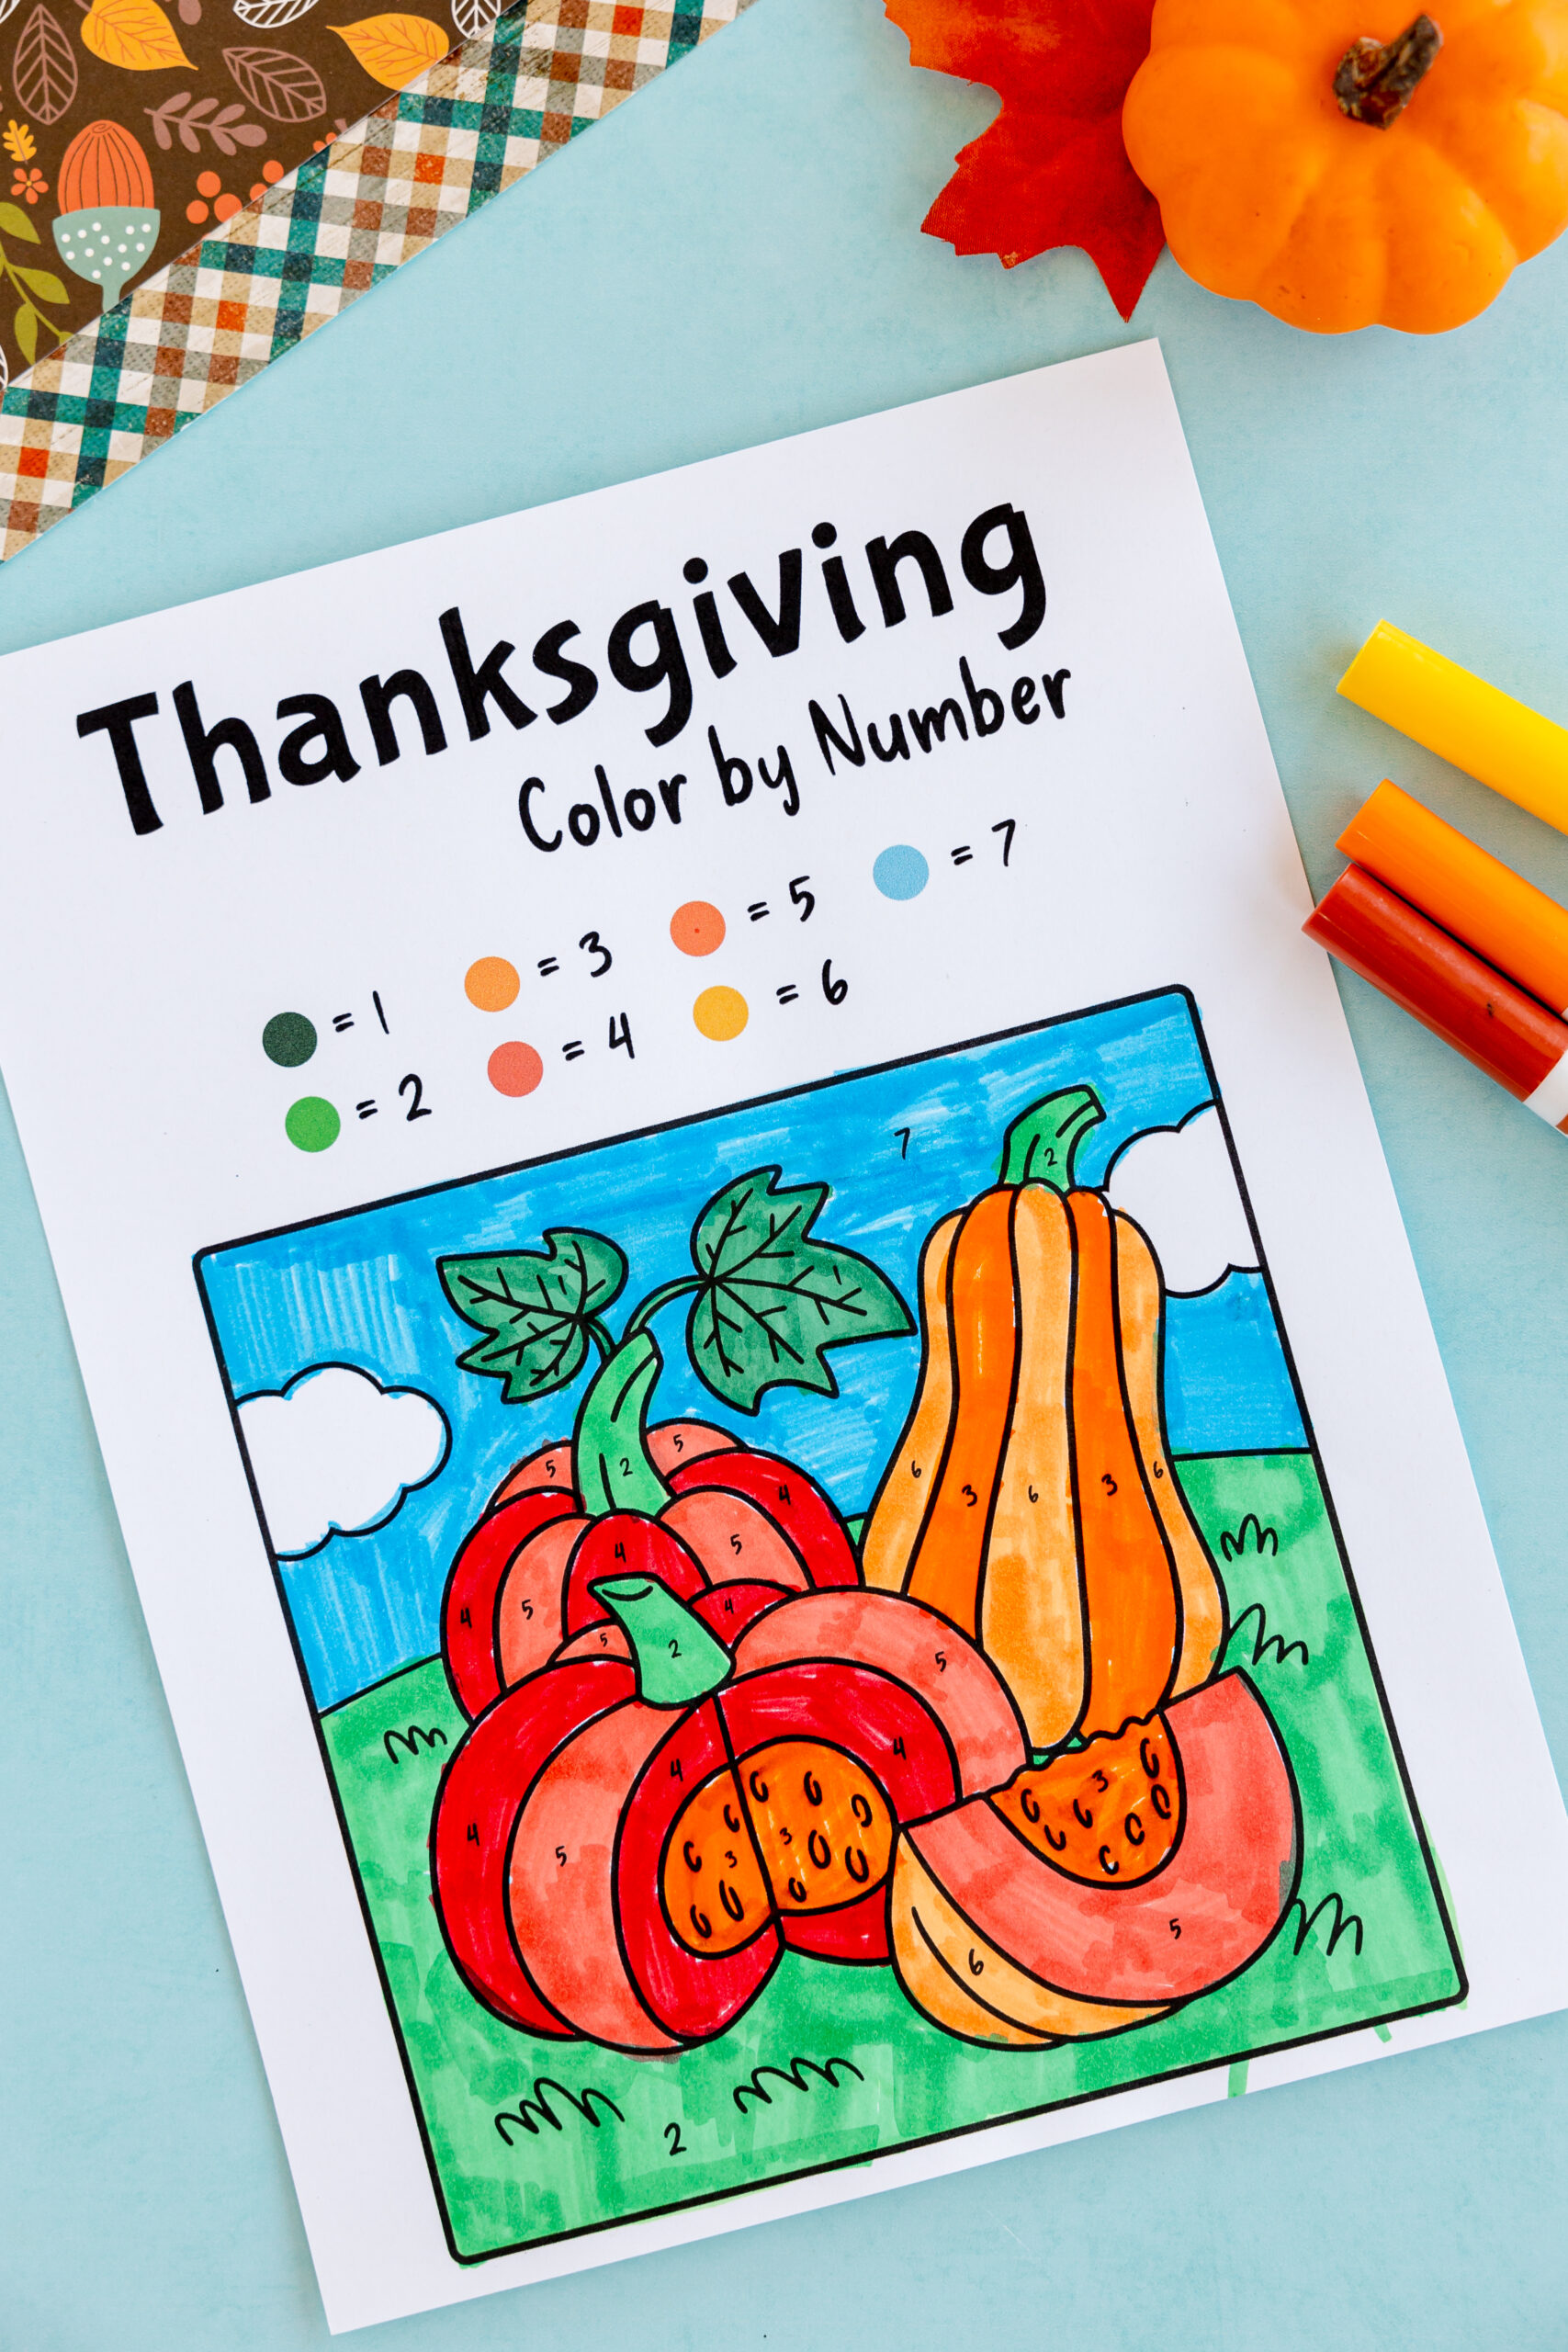 colored in Thanksgiving color by number page